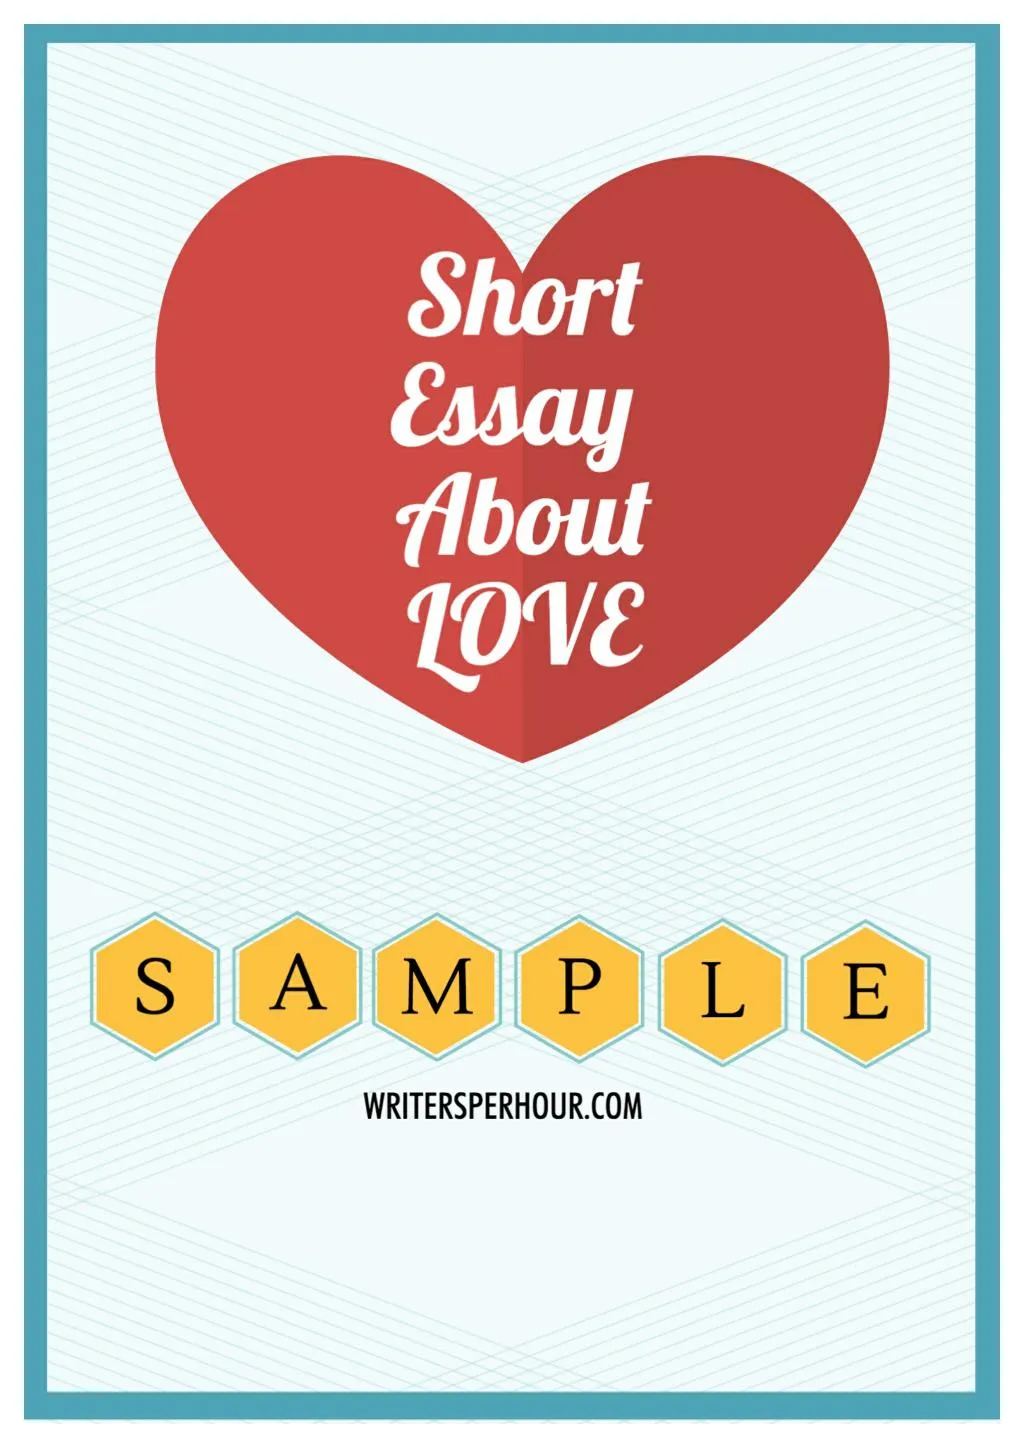 short essay about love 300 words